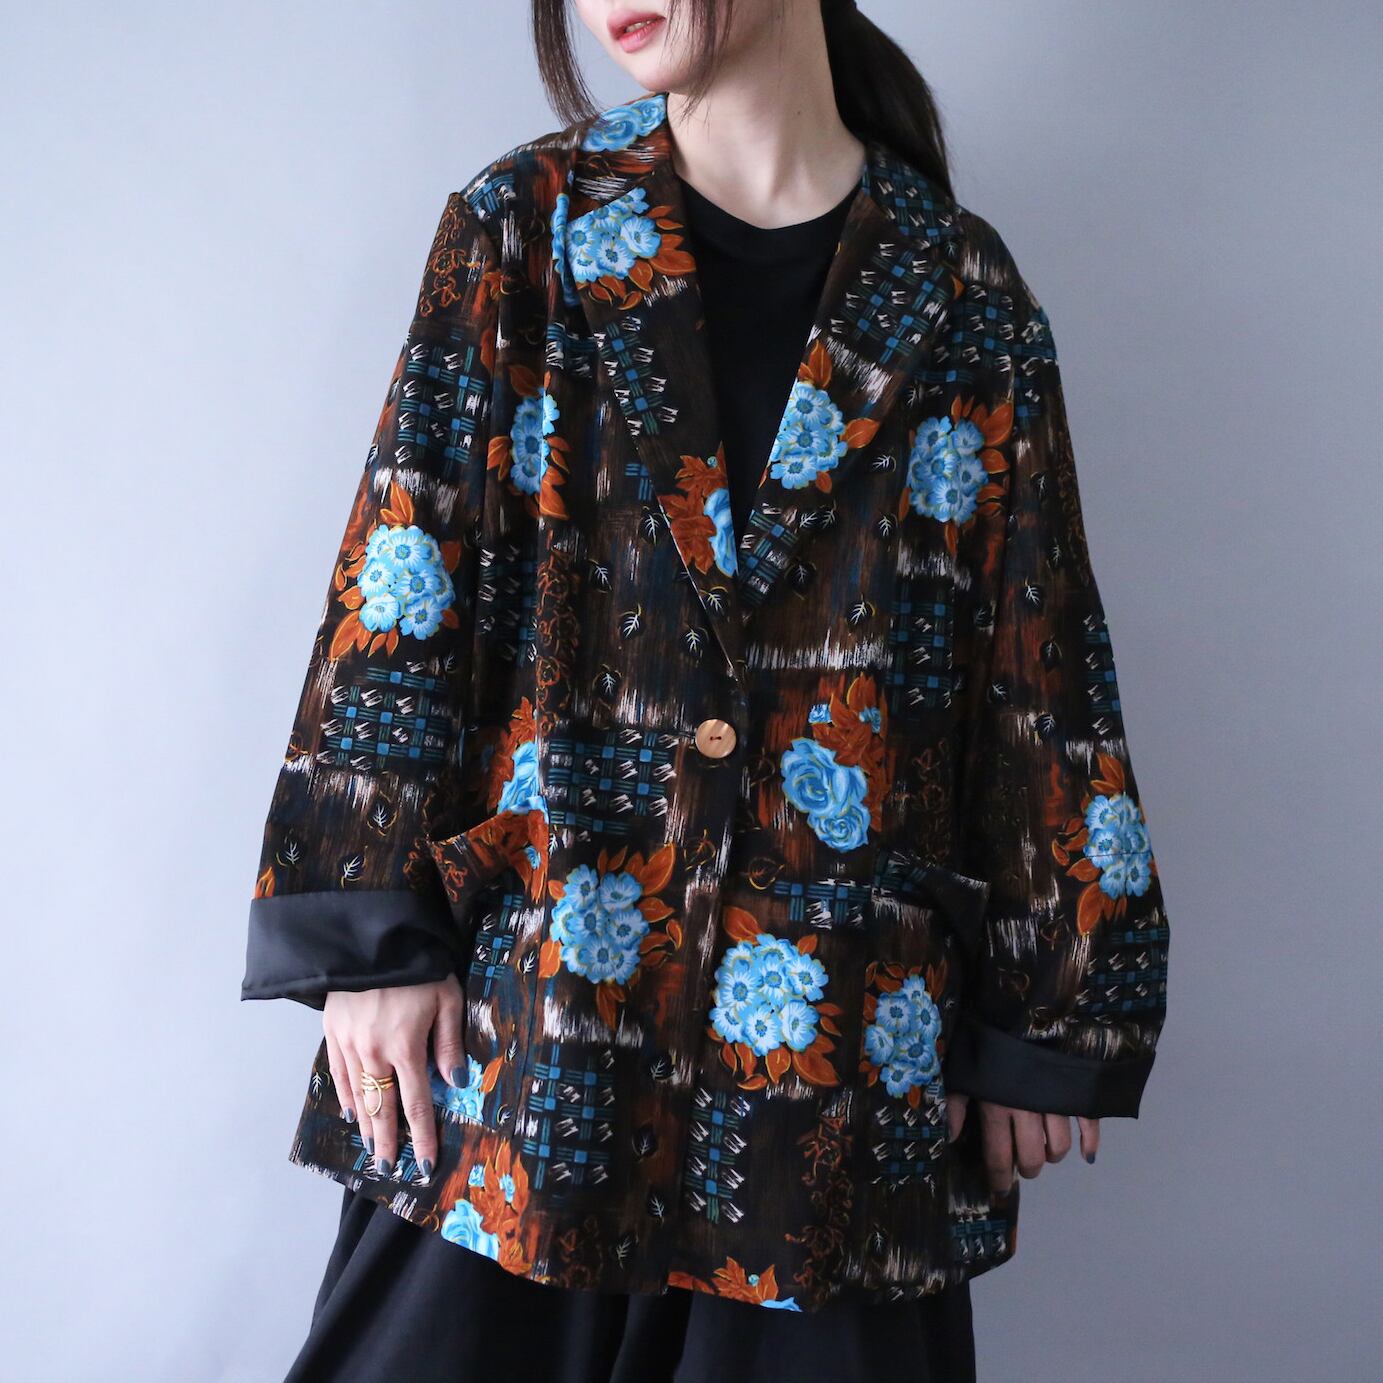 beautiful flower art pattern over silhouette easy tailored jacket